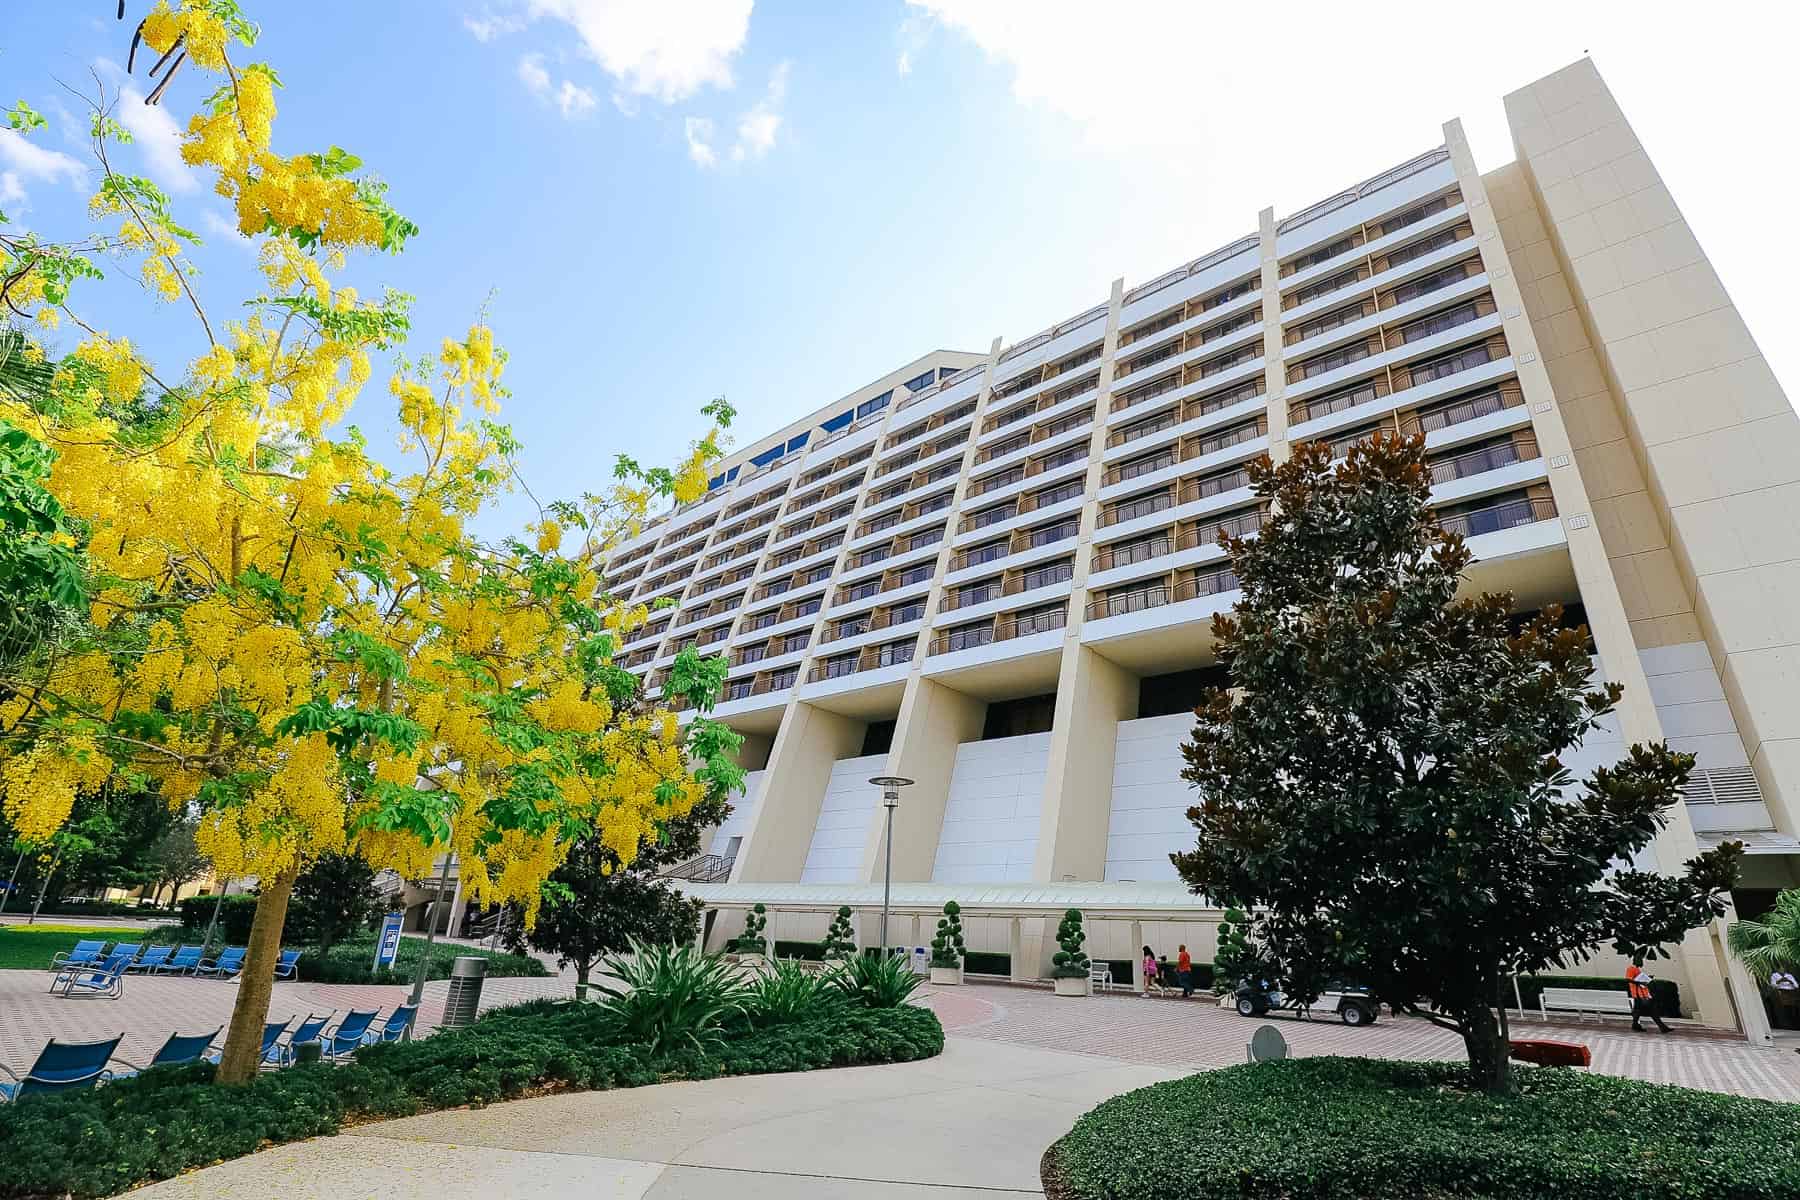 Disney's Contemporary Resort with yellow flowering trees in bloom. 